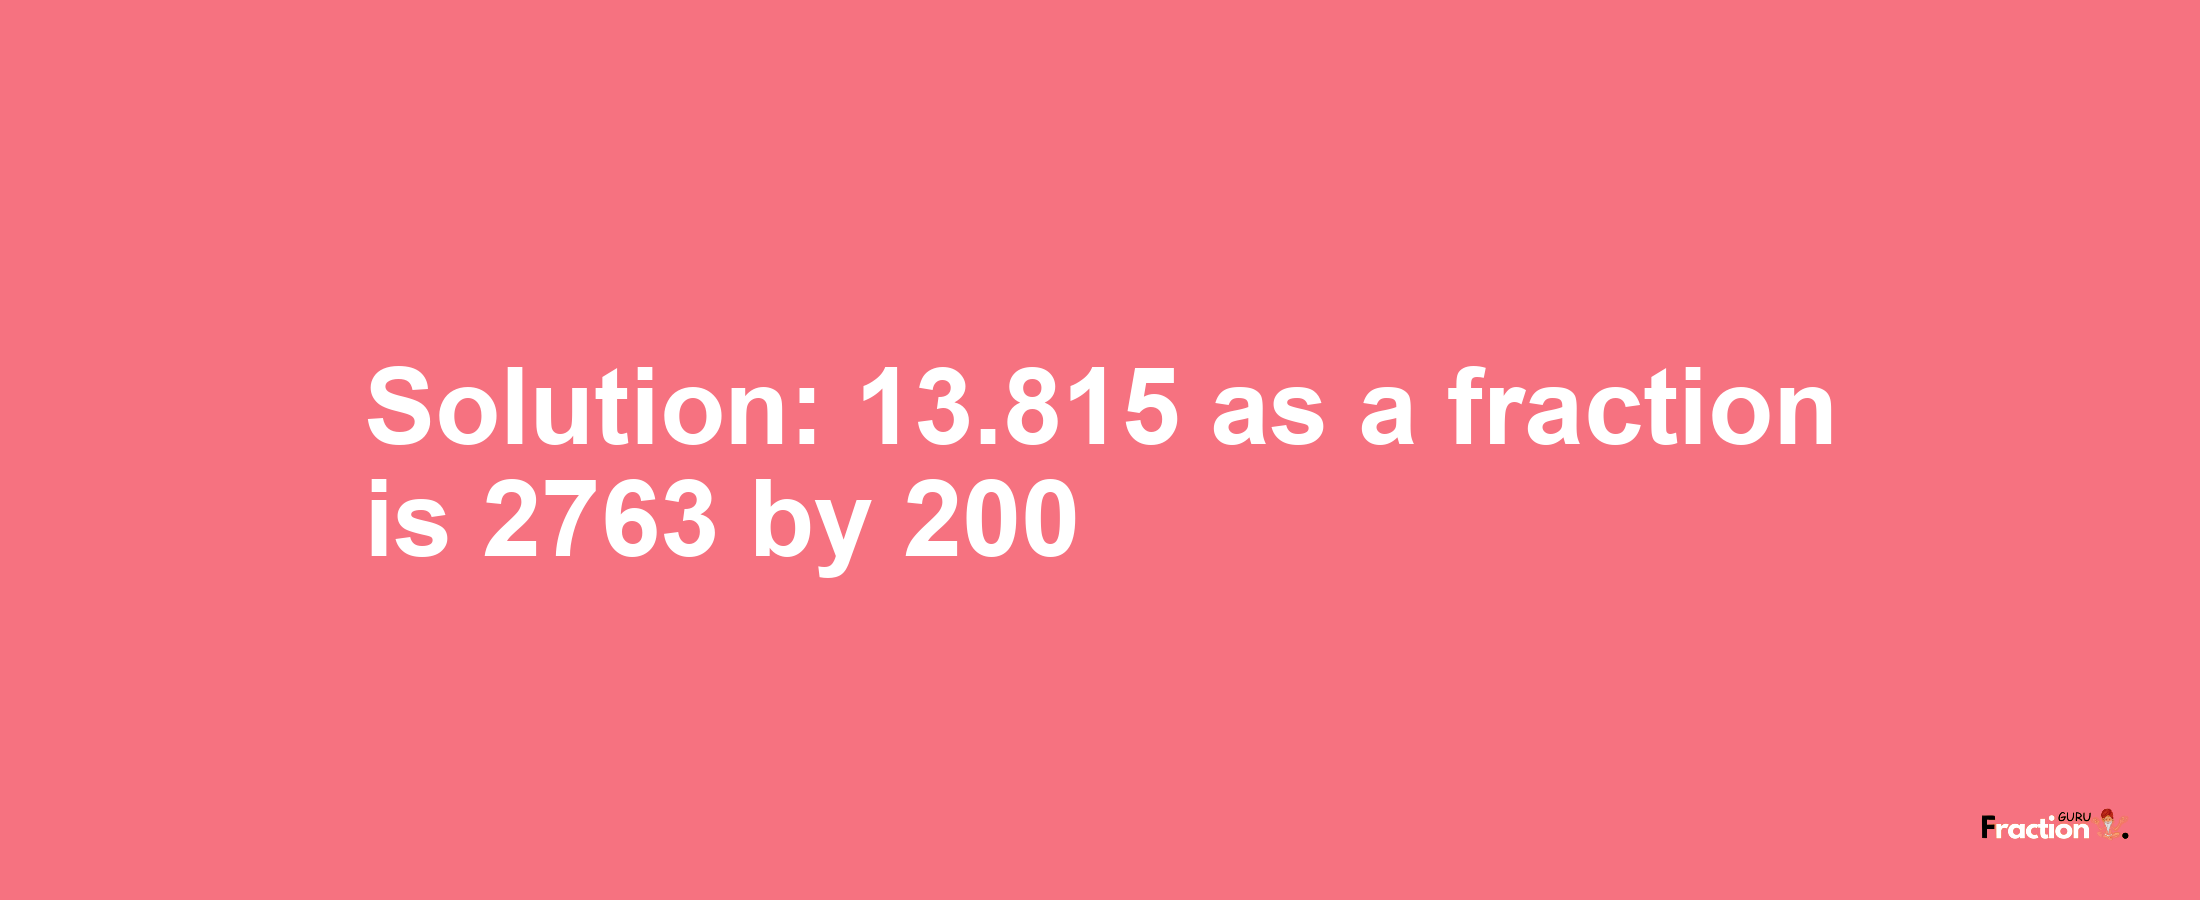 Solution:13.815 as a fraction is 2763/200